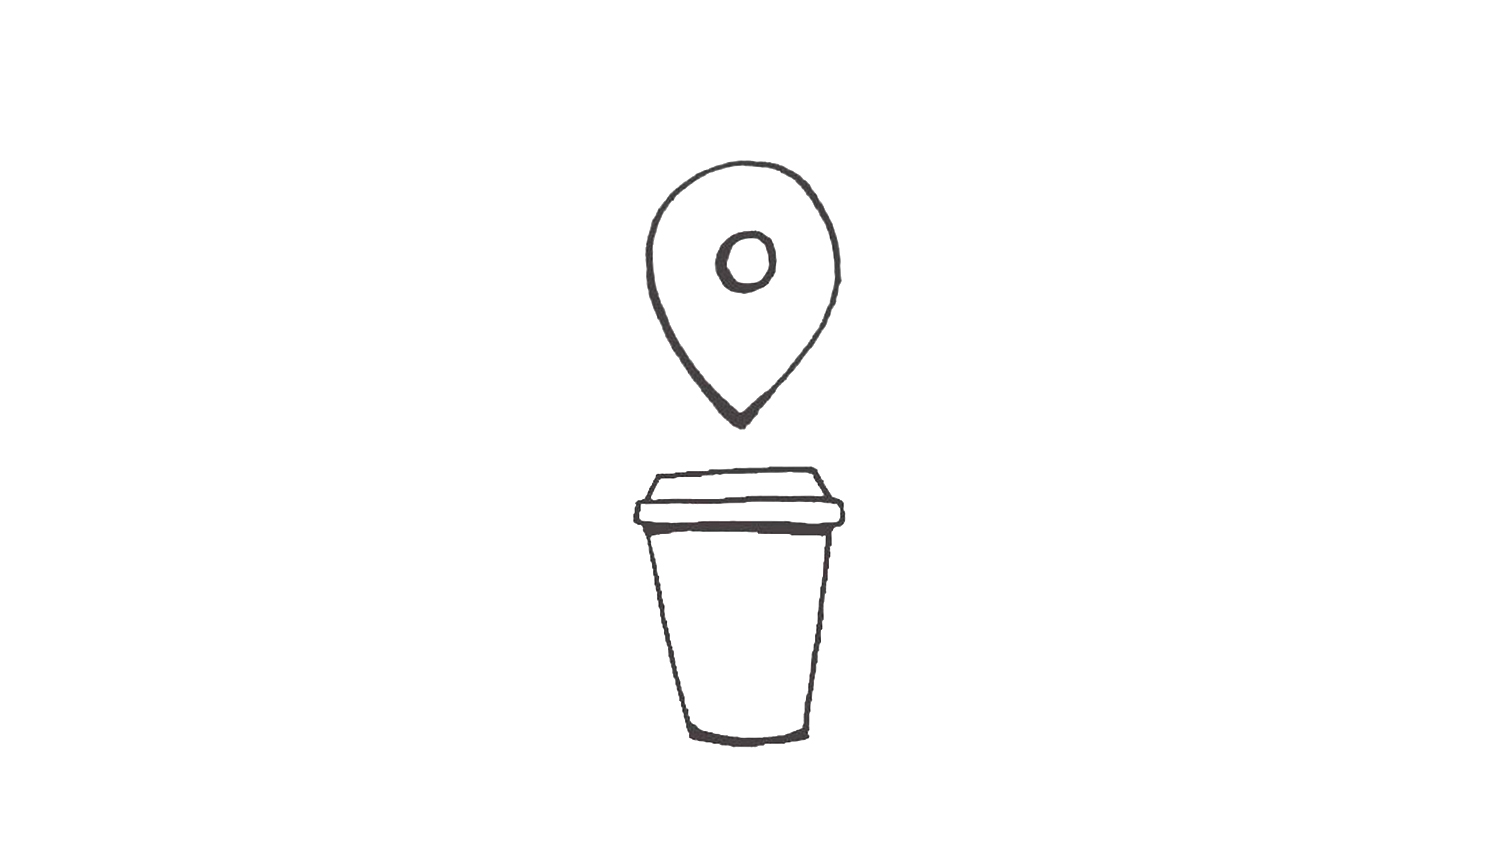 Network of Collection Points available at your favourite cafes and restaurants.